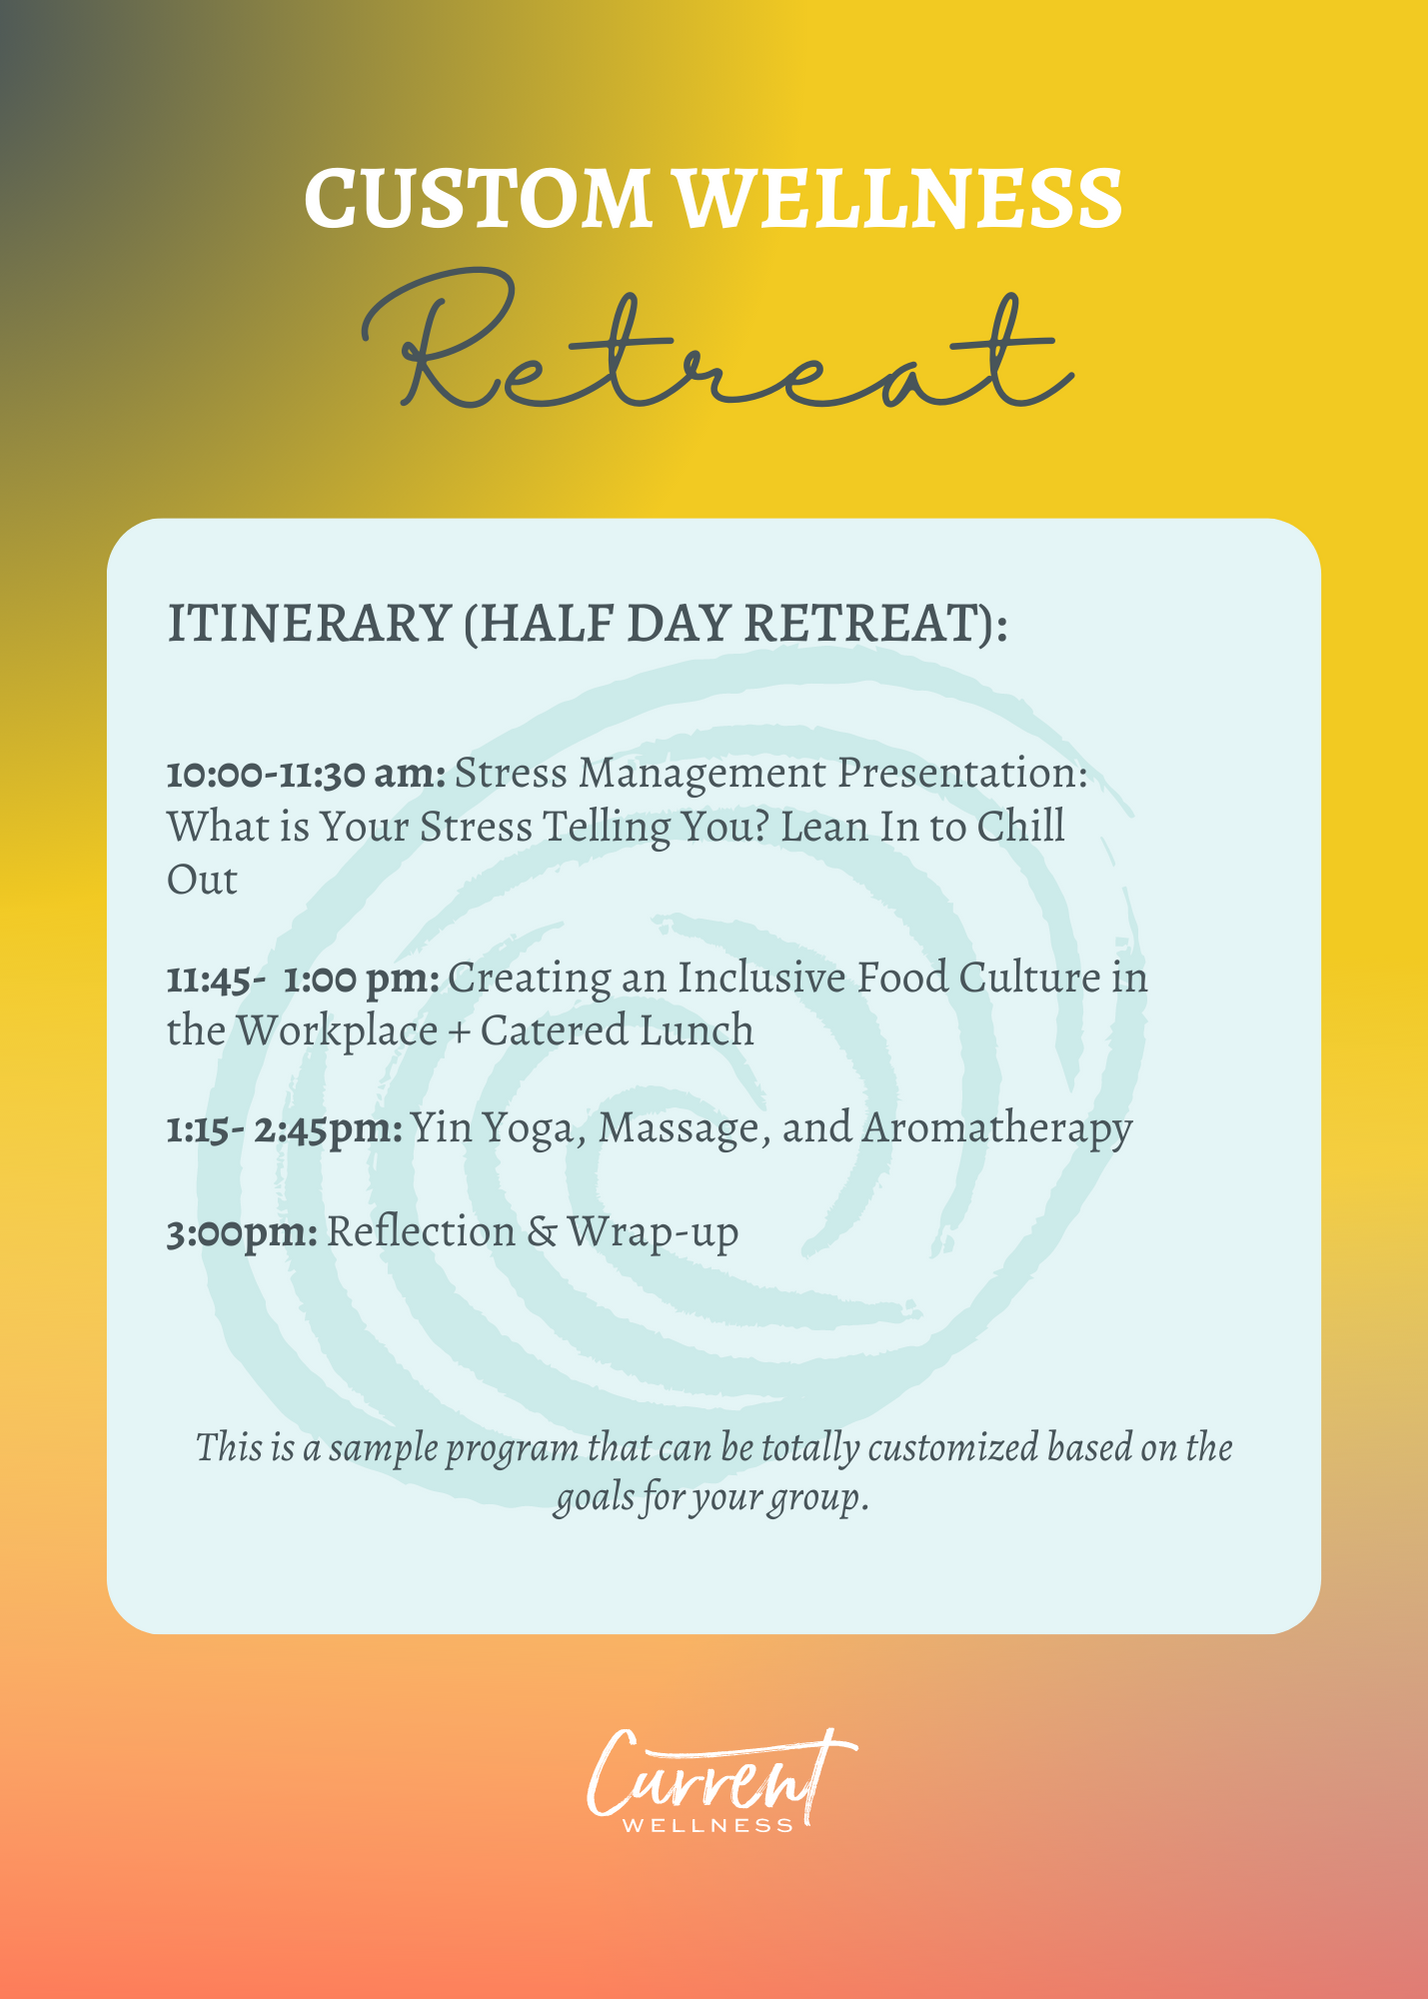 Sample Itinerary (Half Day retreat): 10:00-11:30 am: Stress Management Presentation: What is Your Stress Telling You? Lean In to Chill Out 11:45- 1:00 pm: Creating an Inclusive Food Culture in the Workplace + Catered Lunch 1:15- 2:45pm: Yin Yoga, Massage, and Aromatherapy 3:00pm: Reflection & Wrap-up This is a sample program that can be totally customized based on the goals for your group.